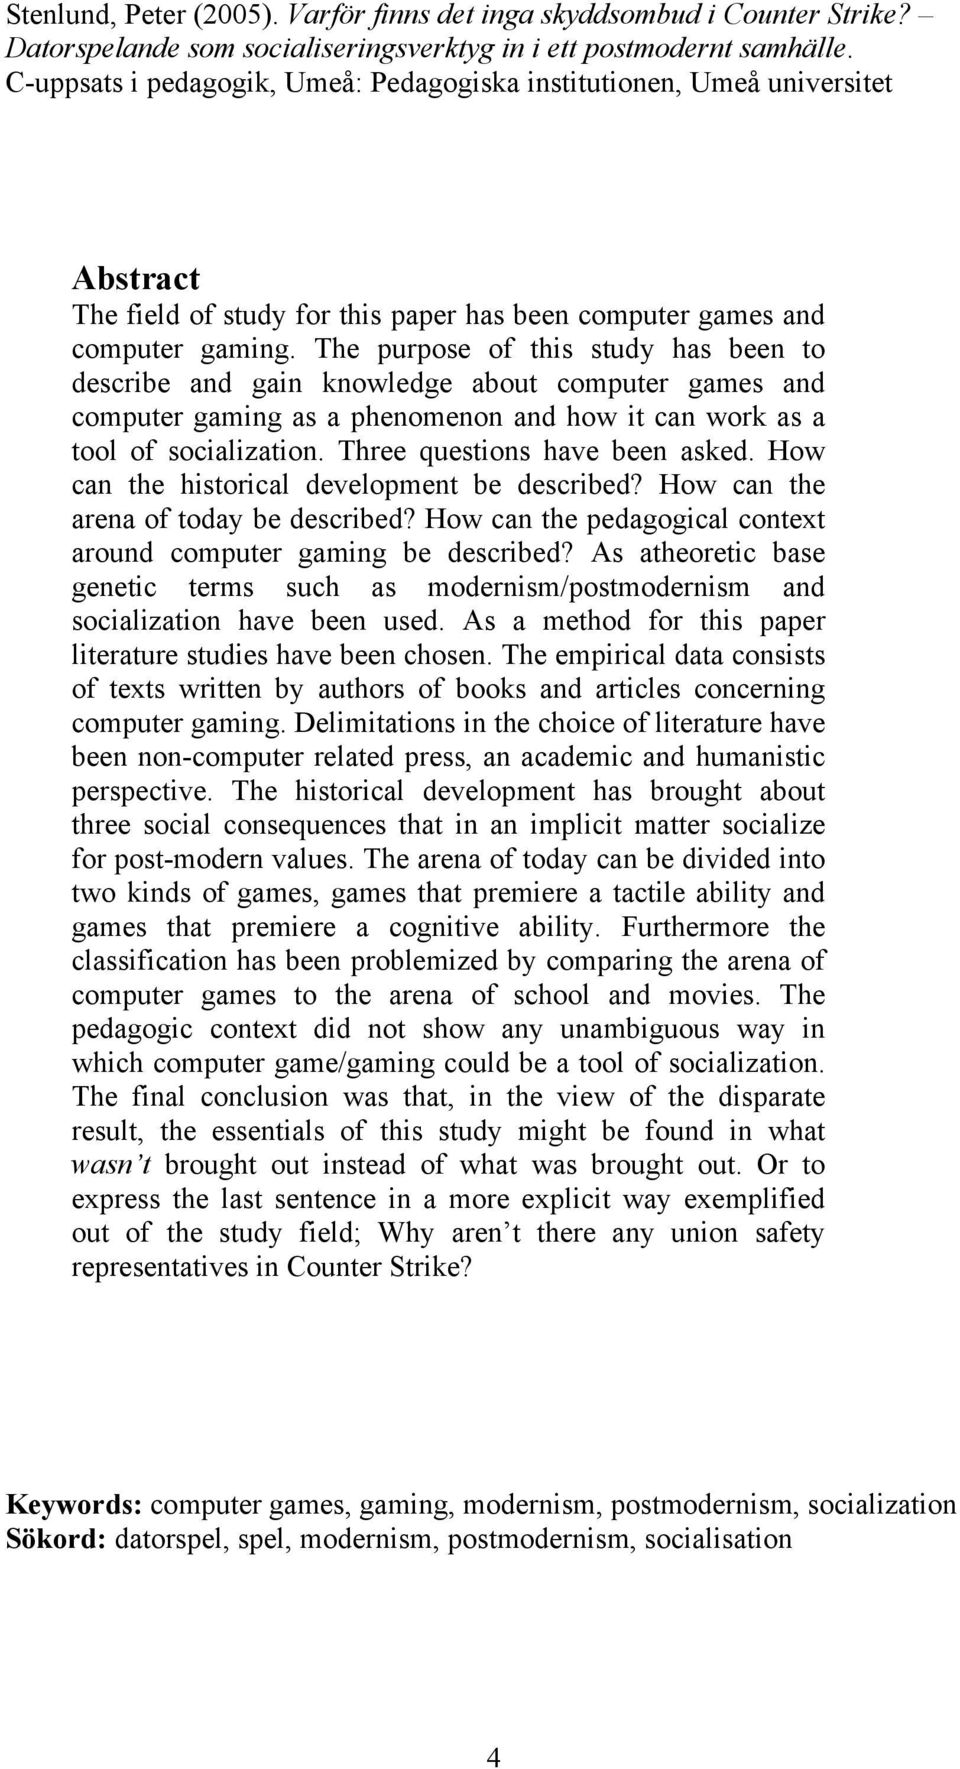 The purpose of this study has been to describe and gain knowledge about computer games and computer gaming as a phenomenon and how it can work as a tool of socialization.